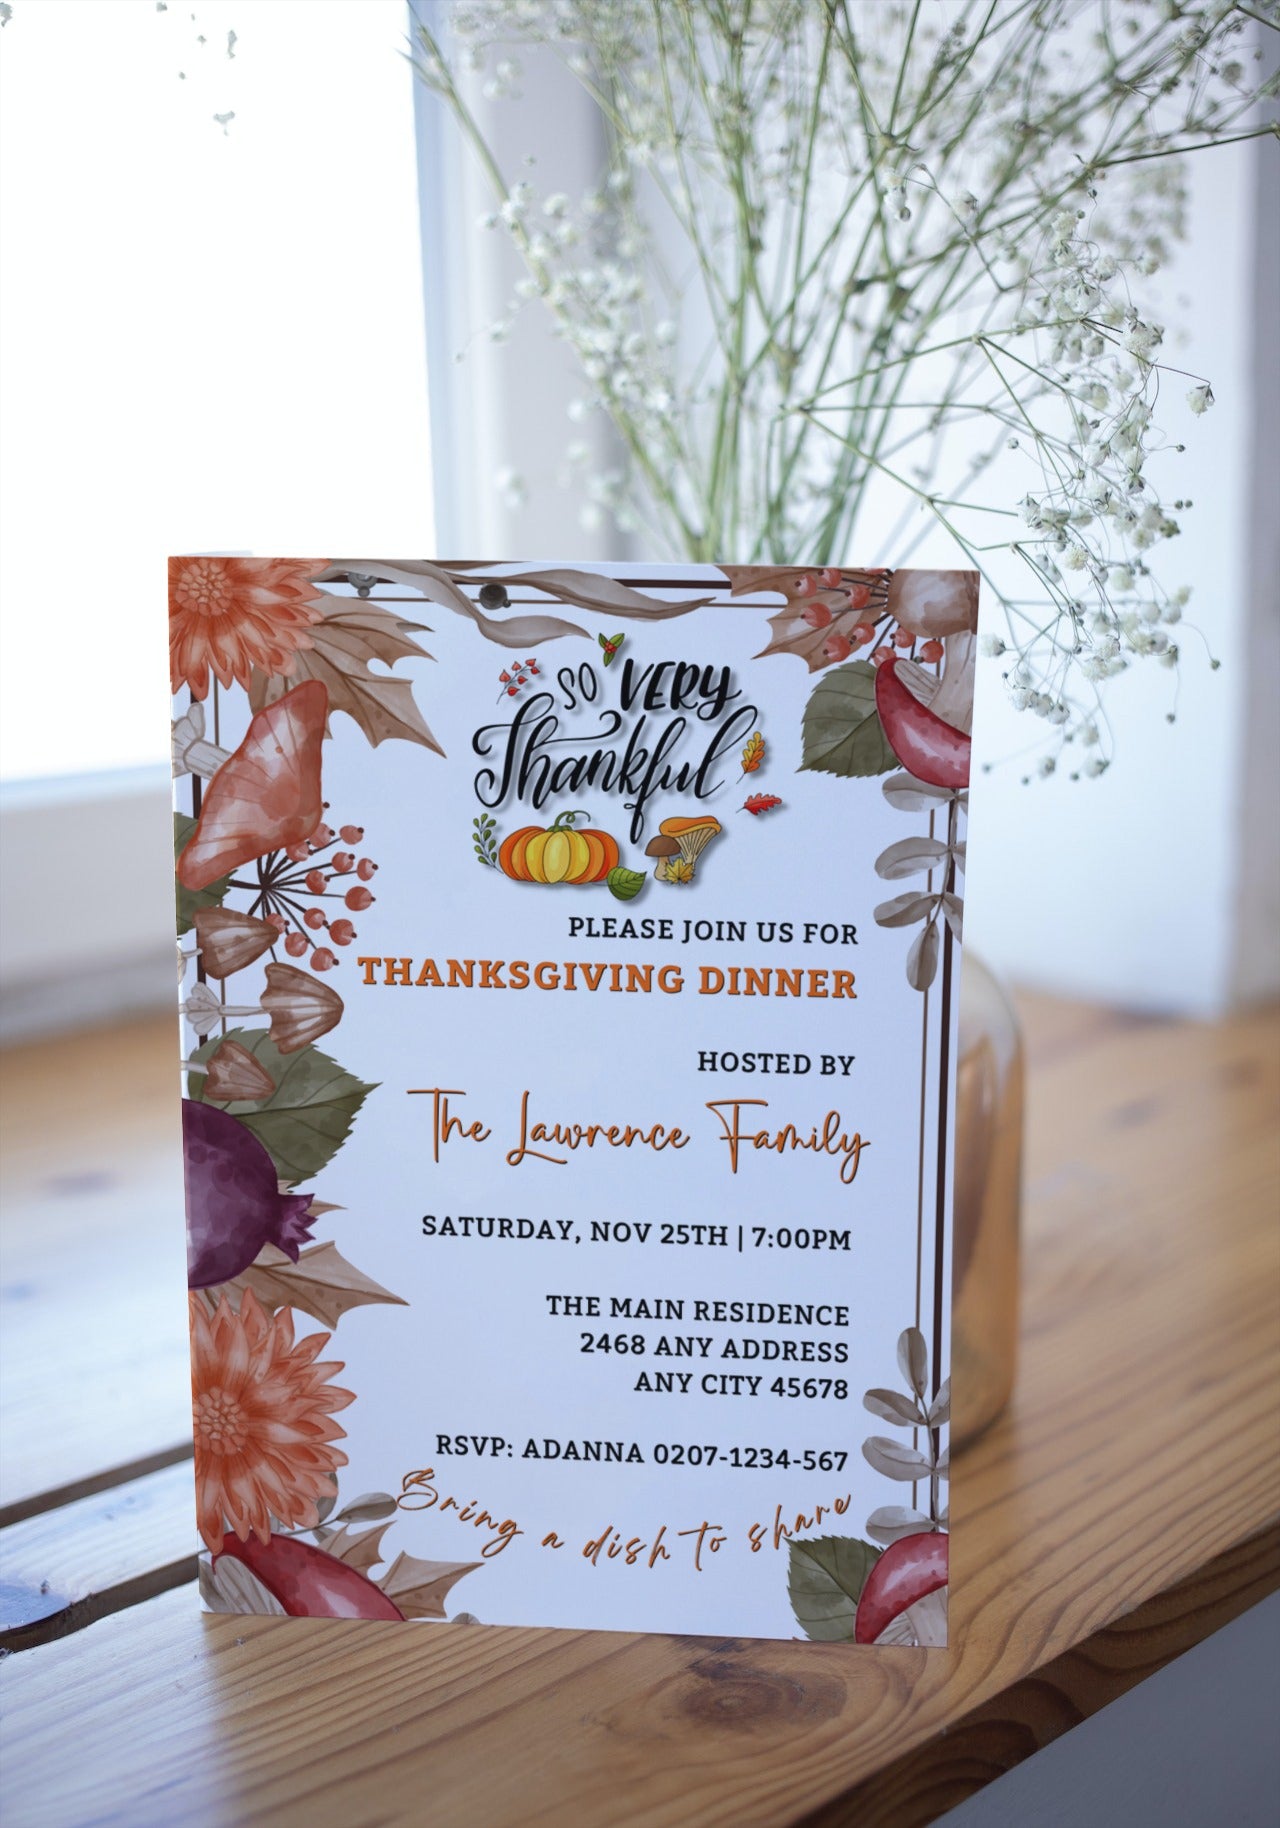 Autumn Leaves Themed Thanksgiving Dinner Evite displayed on a wooden surface with flowers and autumn leaves. Customizable digital invitation template for easy personalizing and sharing.